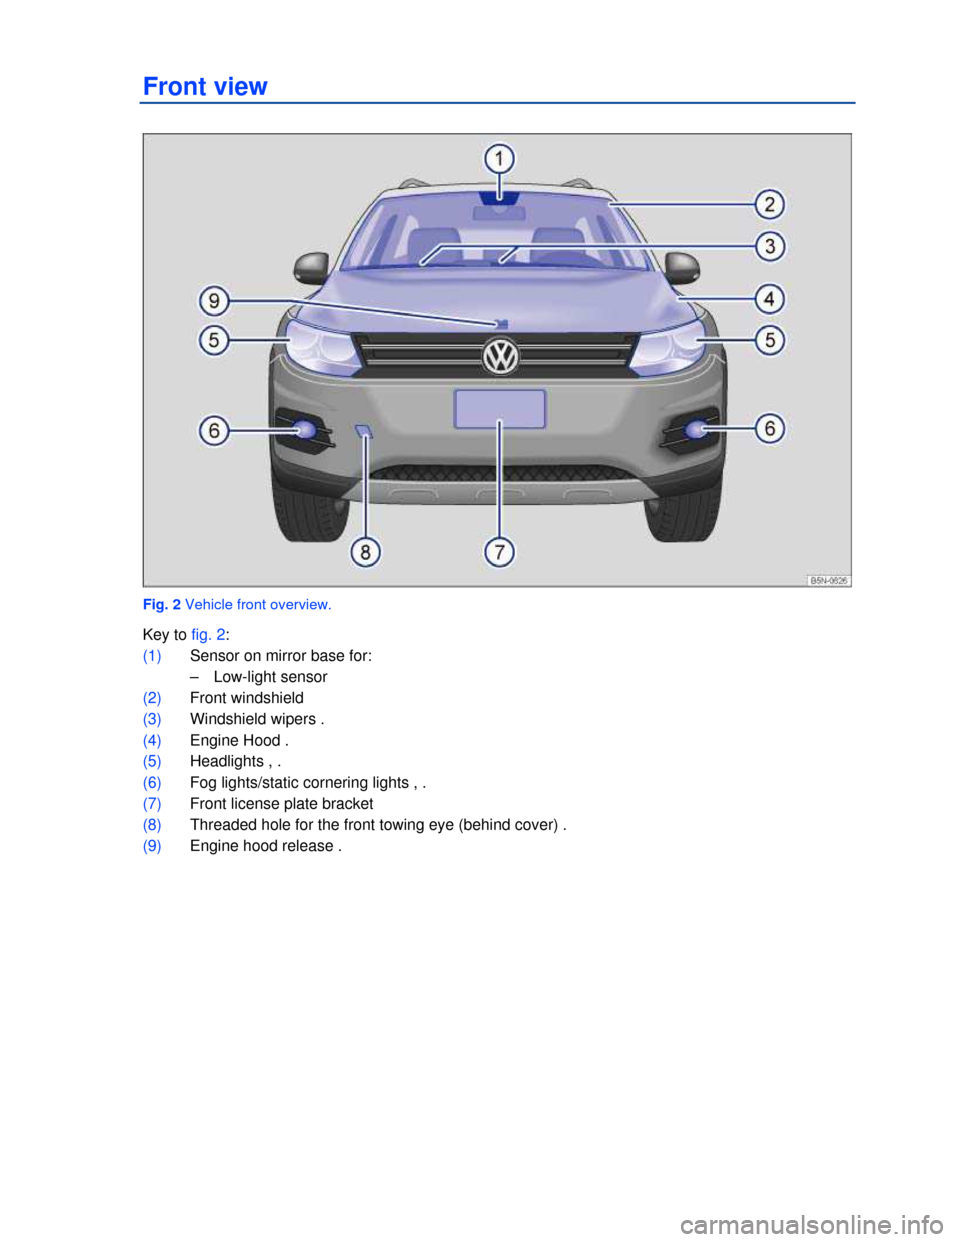 VOLKSWAGEN TIGUAN 2013 1.G Owners Manual  
Front view 
 
Fig. 2 Vehicle front overview. 
Key to fig. 2: 
(1) Sensor on mirror base for: 
–  Low-light sensor 
(2) Front windshield 
(3) Windshield wipers . 
(4) Engine Hood . 
(5) Headlights 